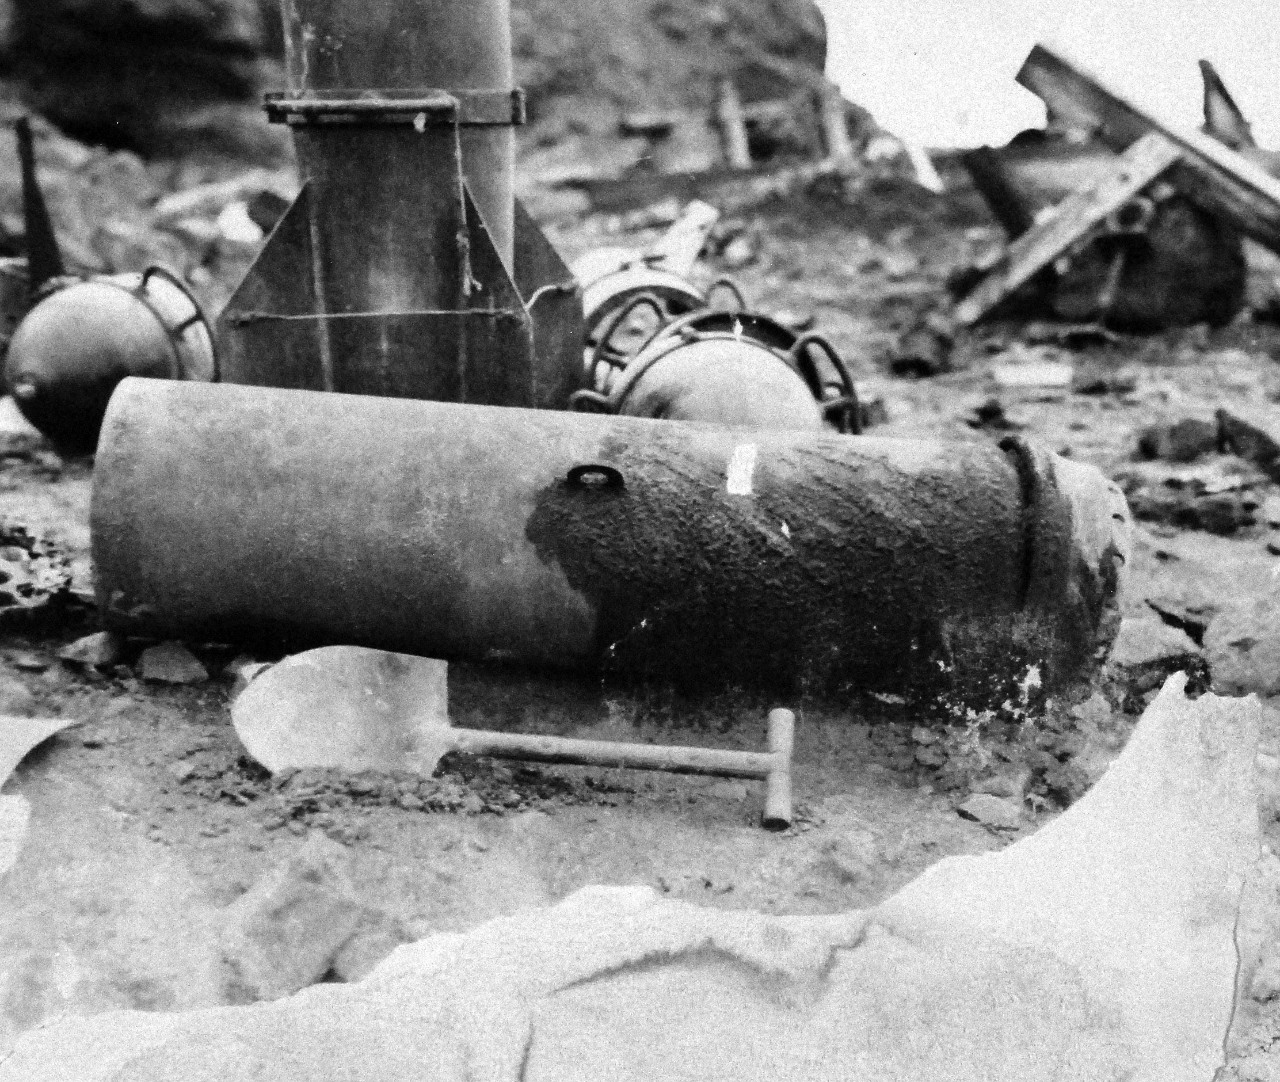 127-GW-304-142861:  Battle for Iwo Jima, February-March 1945.   Side view of explosive body of 12” rocket.  Note 32cm Spigot mortar parts in the background.  Photographed by Morejohn, 1945.  Official U.S. Marine Corps photograph, now in the collections of the National Archives.  (2016/02/17).